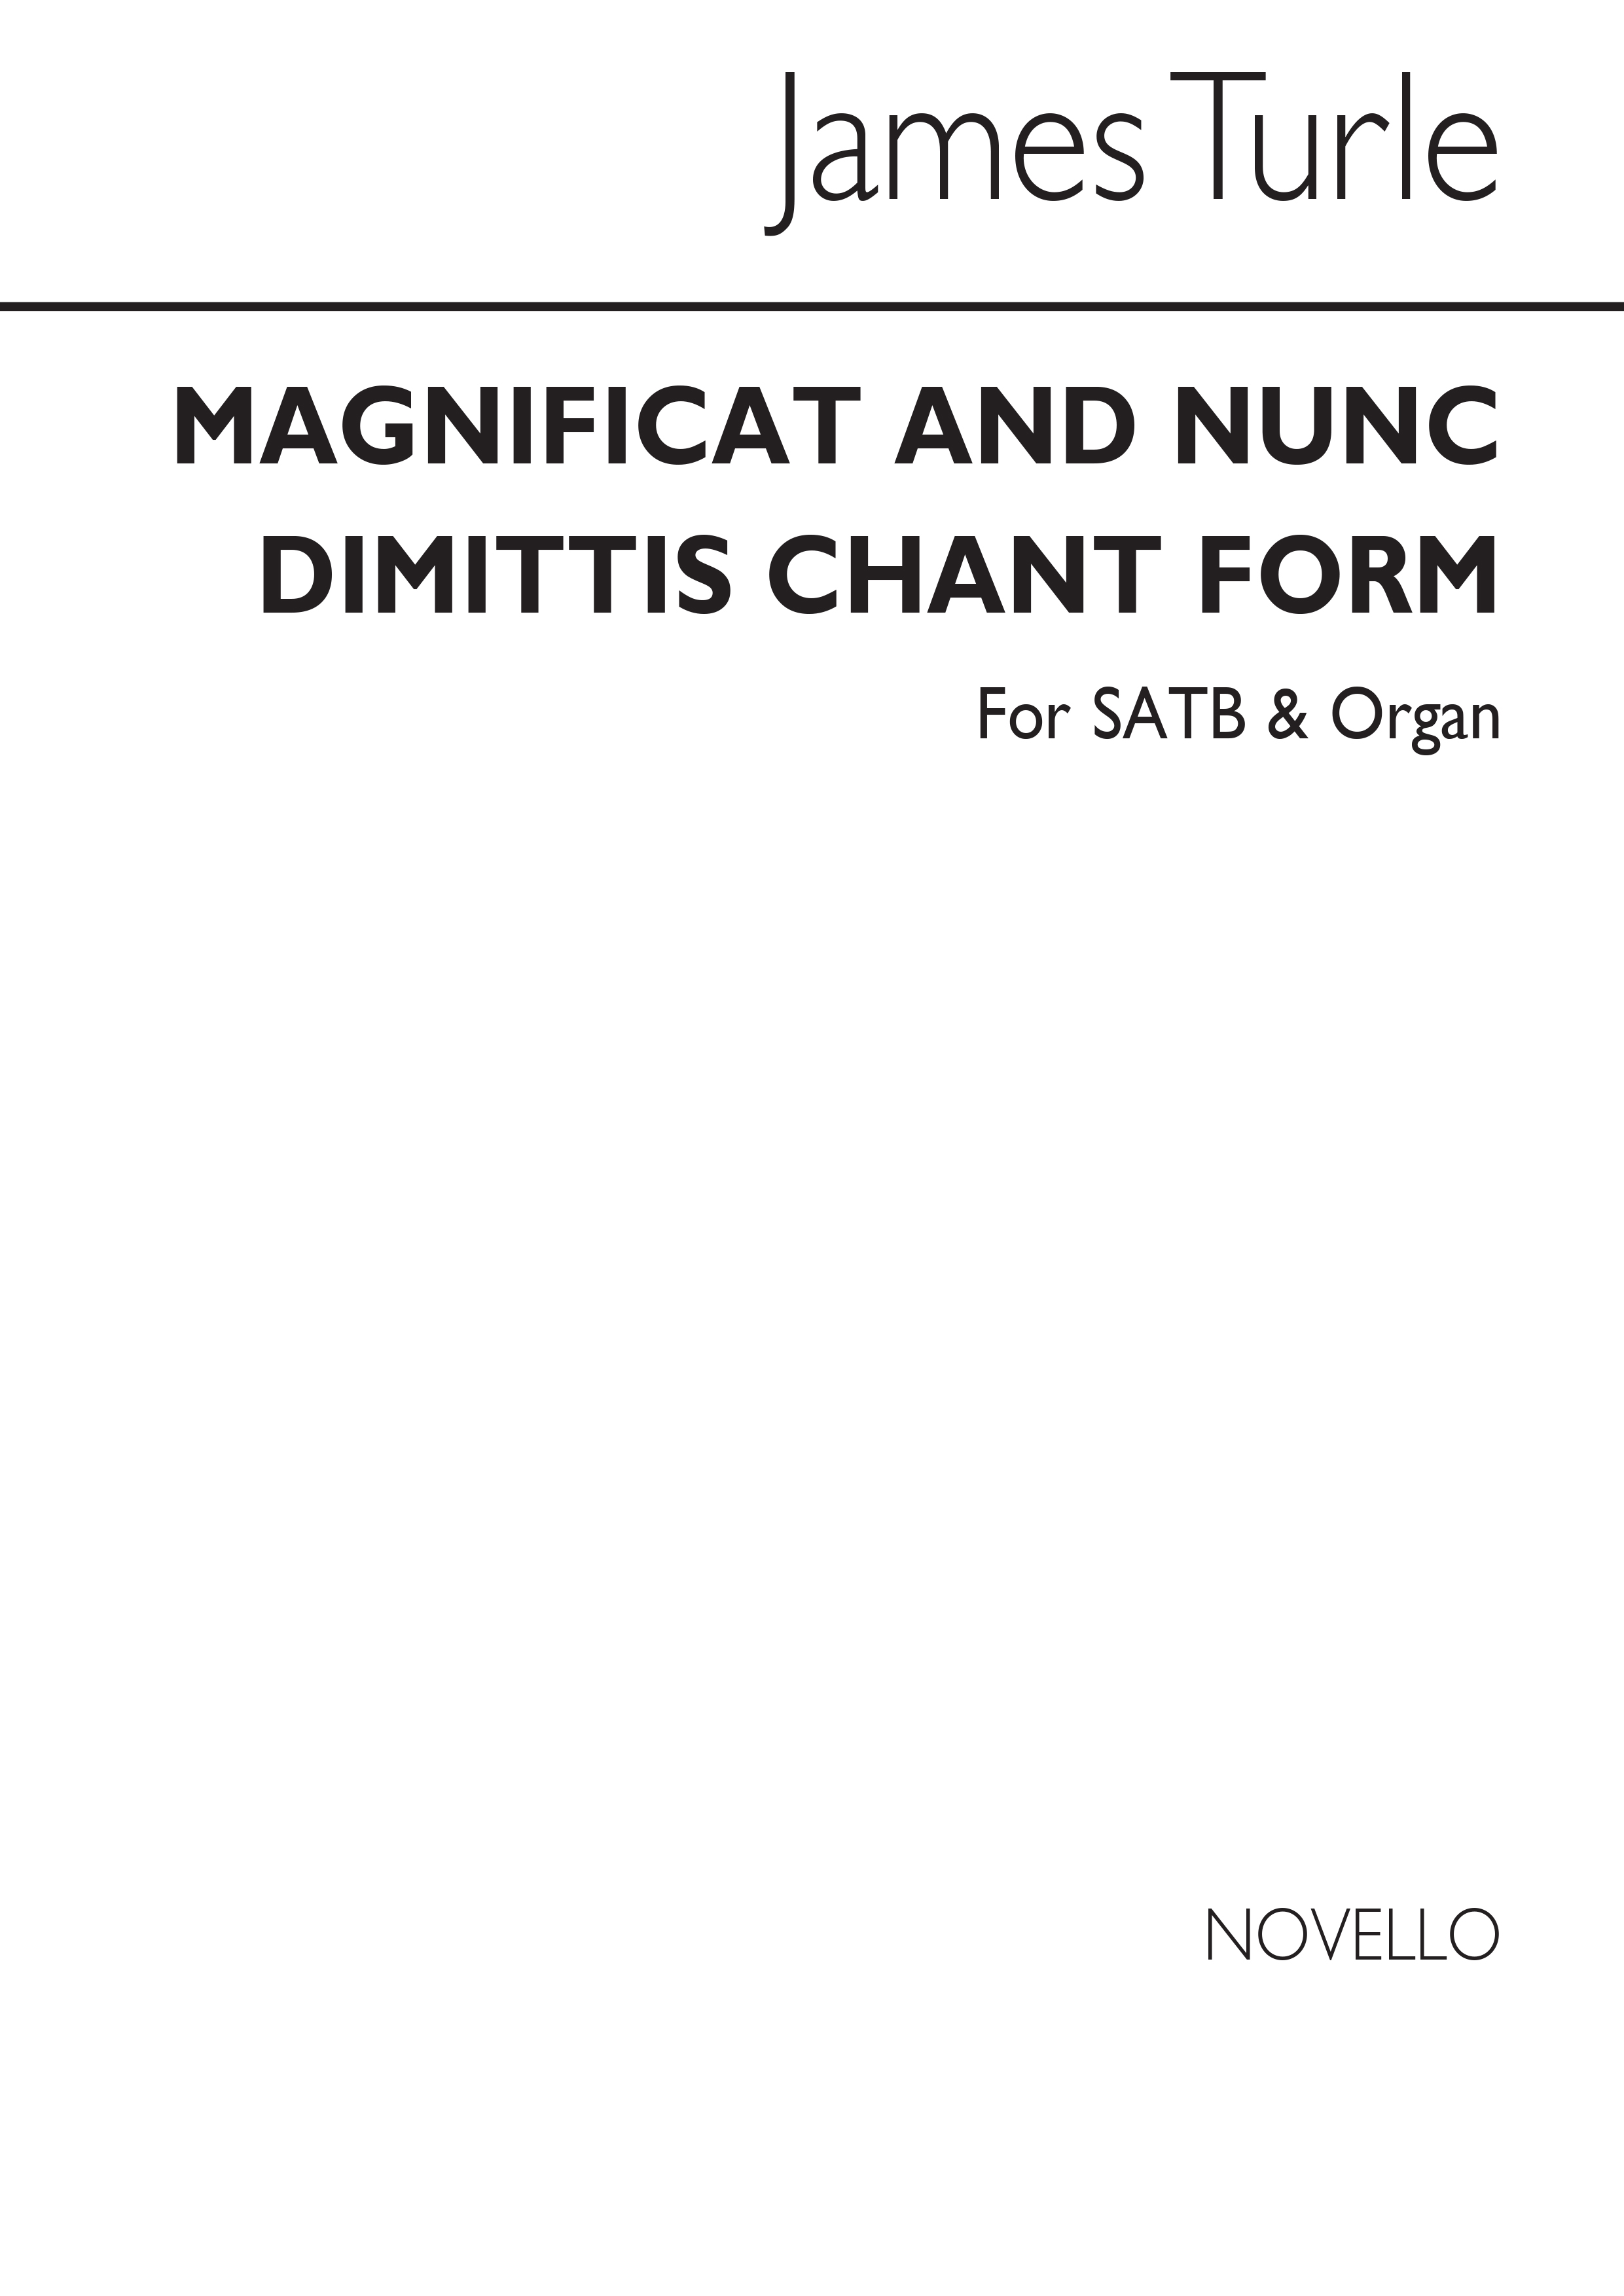 James Turle: Magnificat And Dimittis (Chant Form) In E Flat Satb/Organ